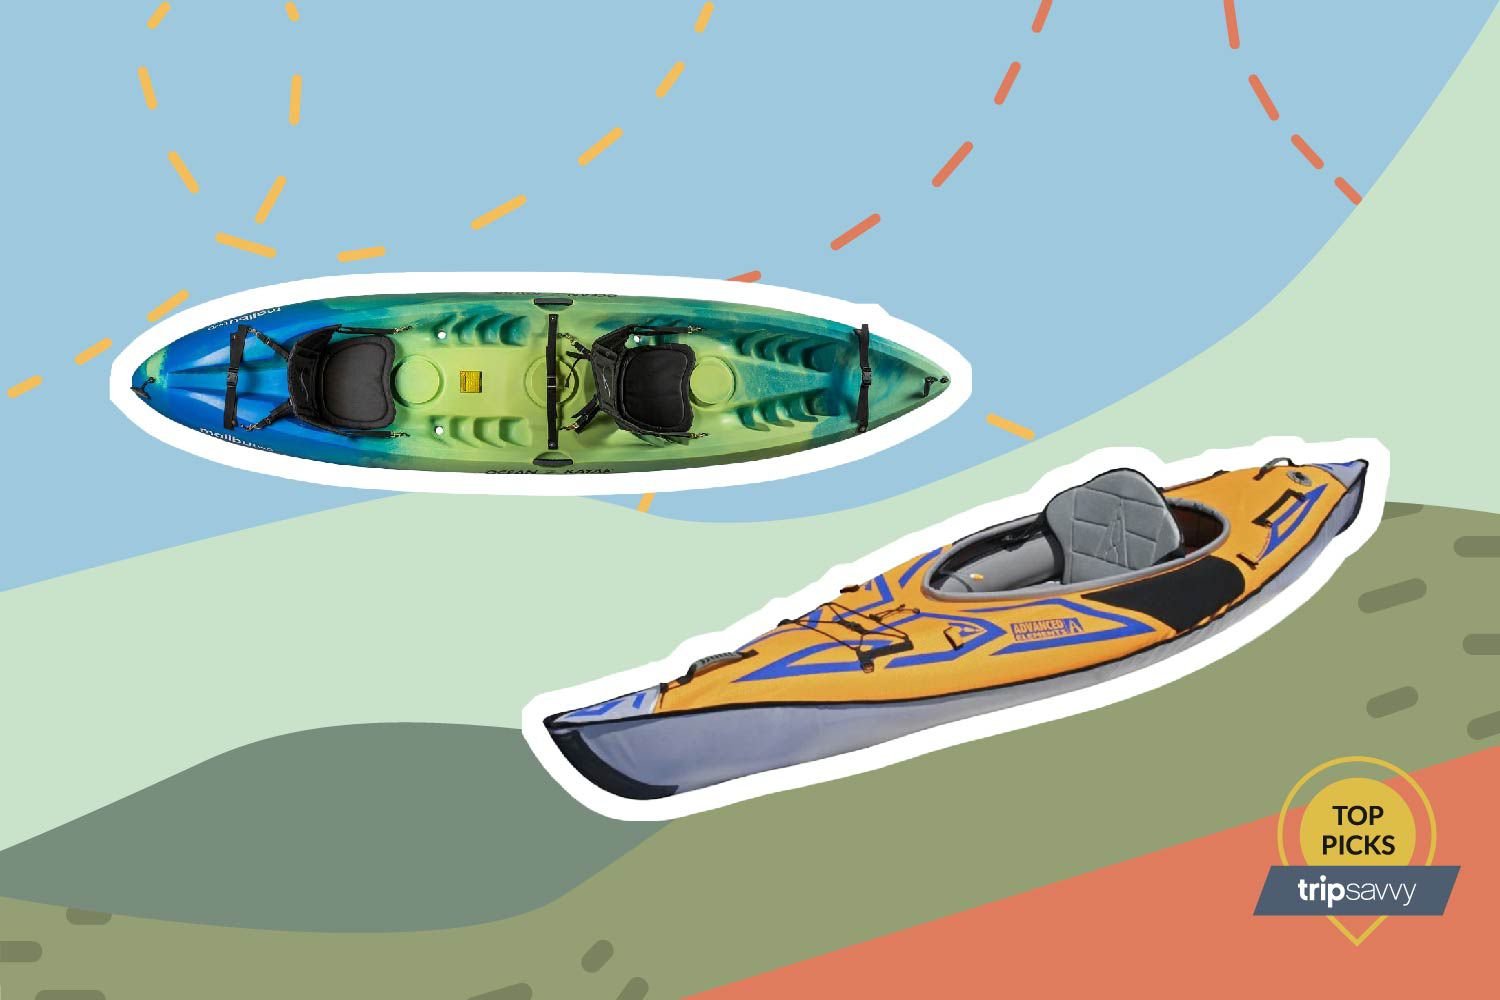 Cruise Along Easily With the Best Recreational Kayaks